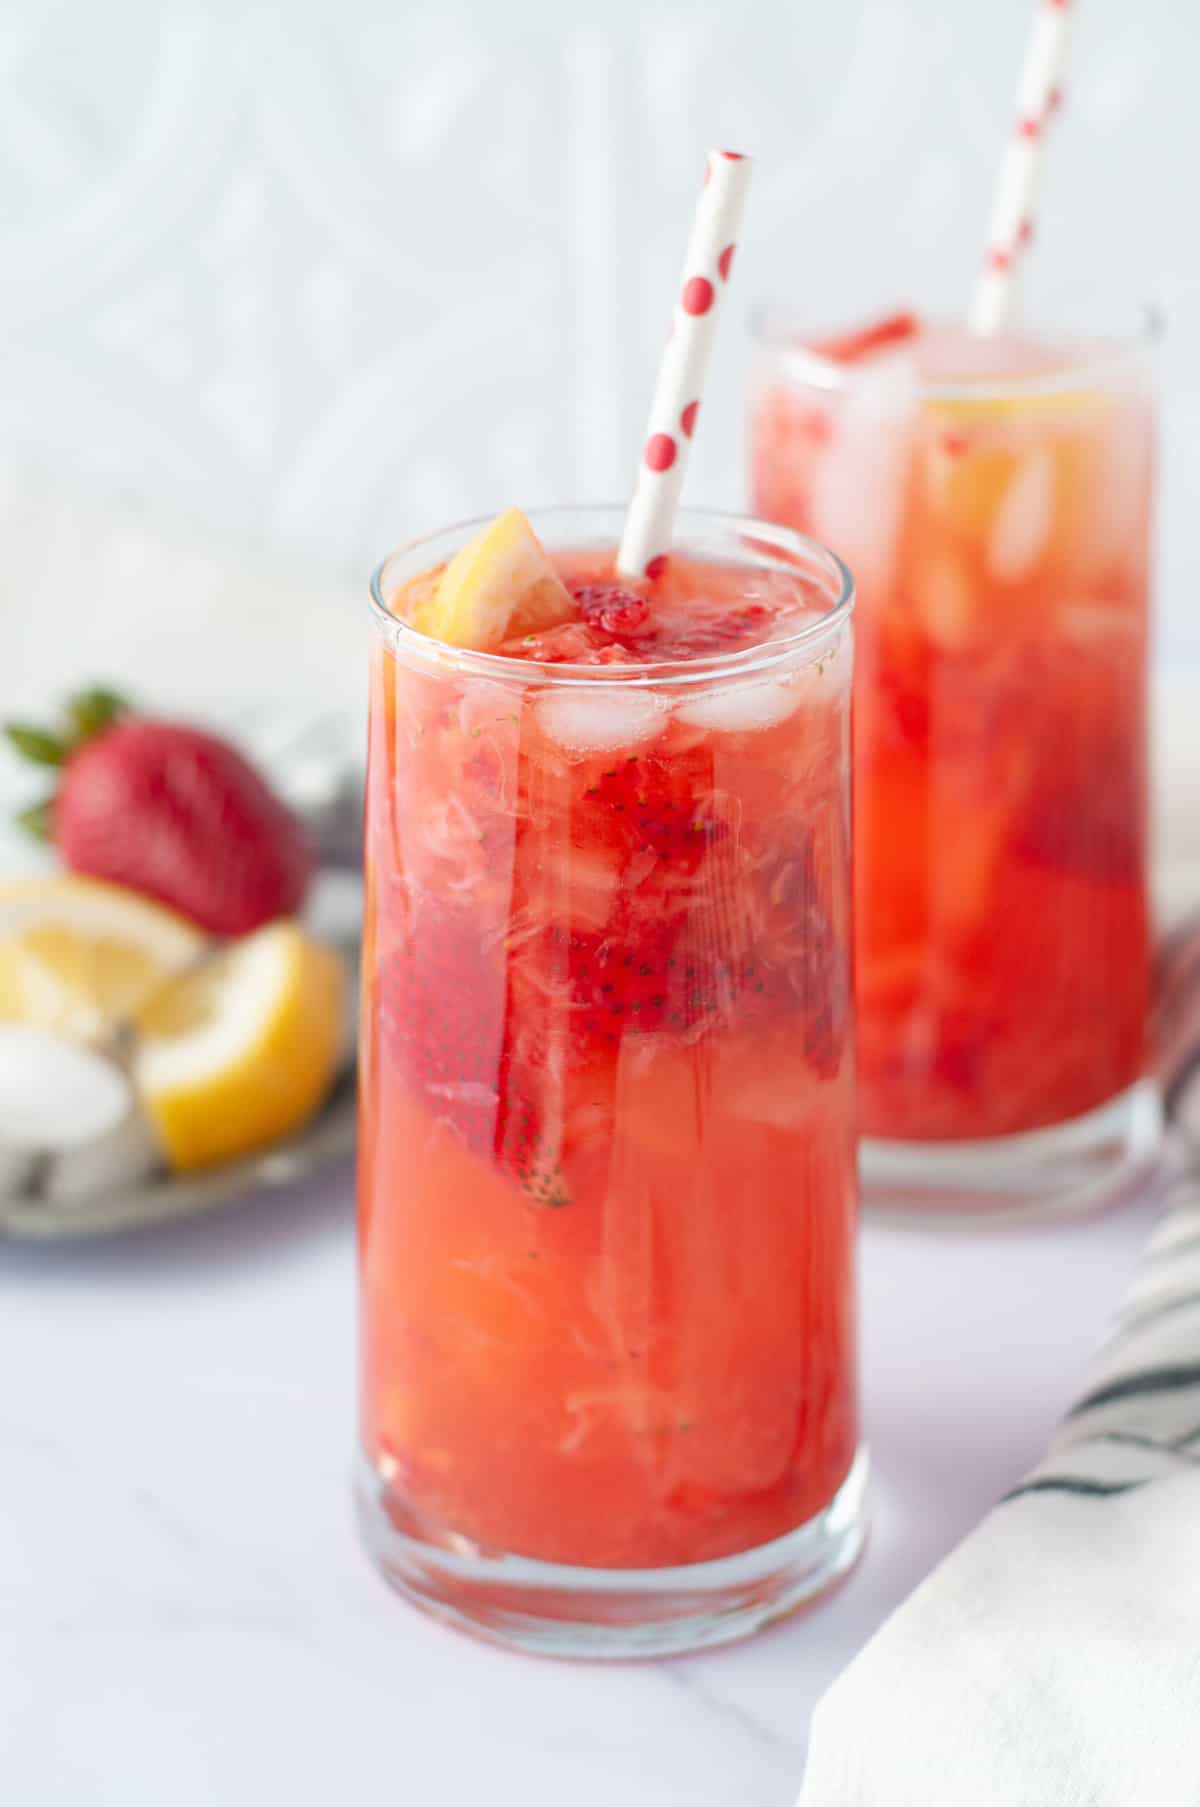 Tall classes with a strawberry lemonade cocktail in them. Red and white striped straw, garnished with strawberries and lemons